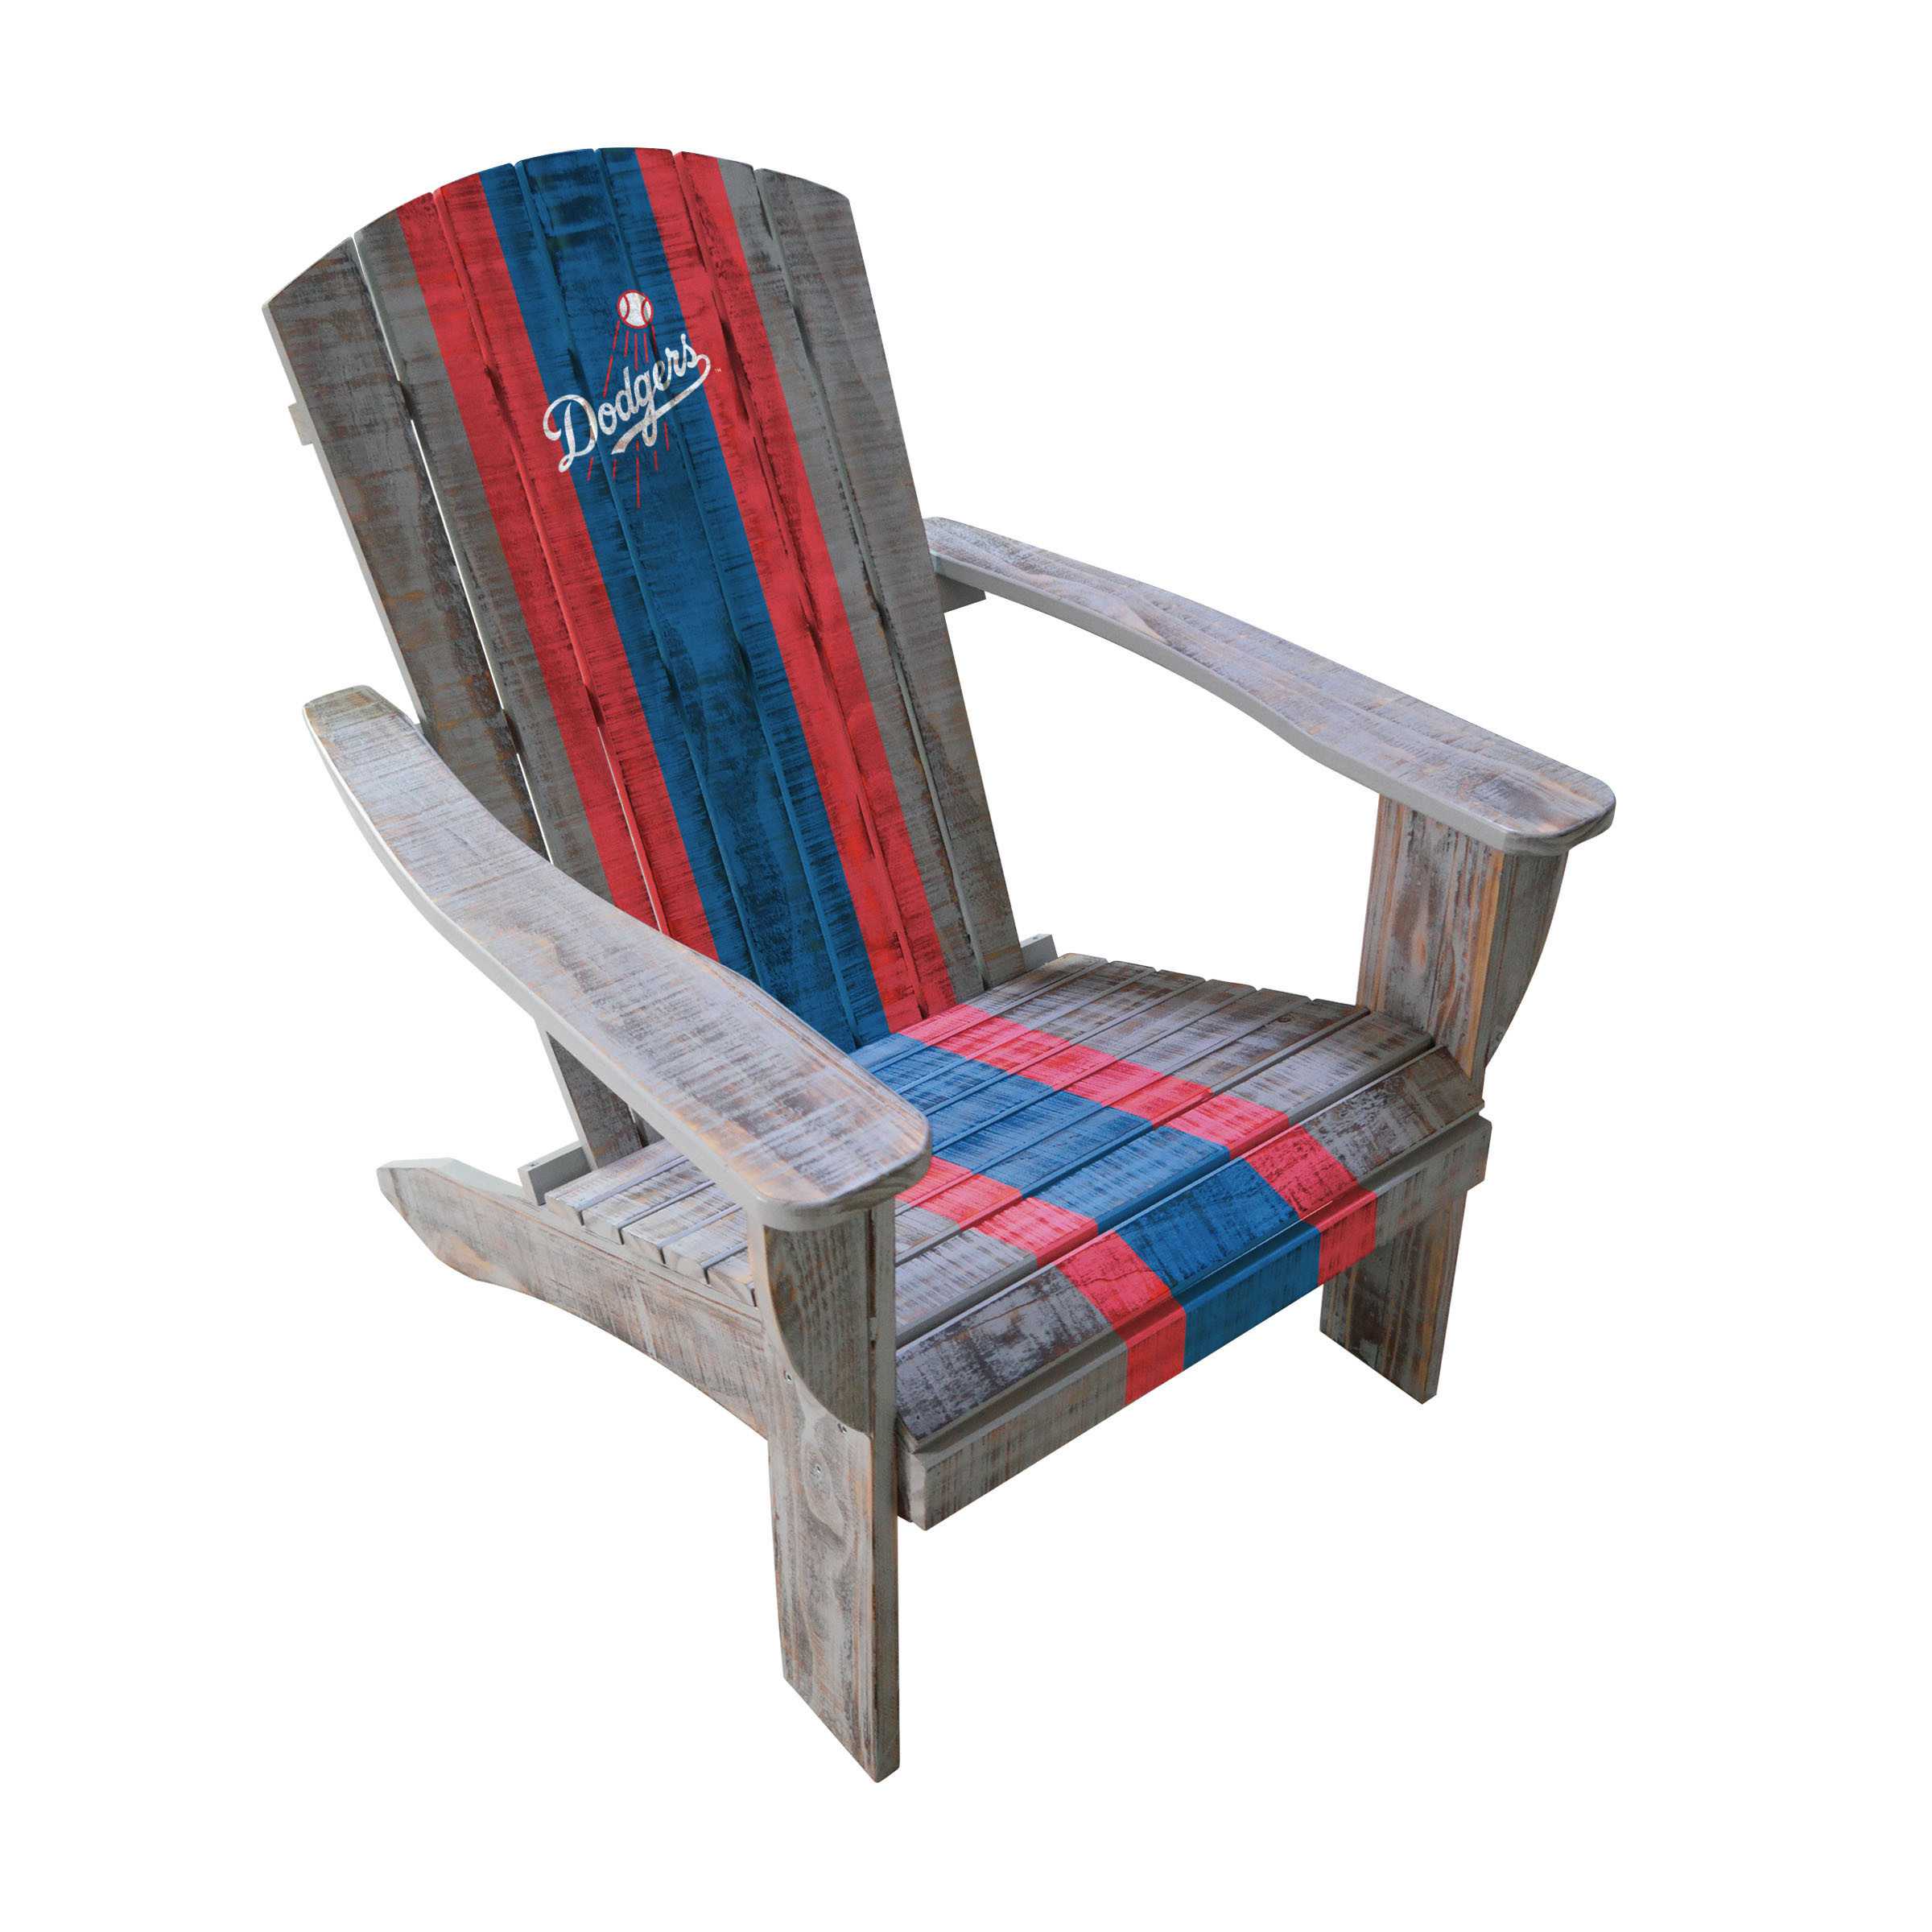 LOS ANGELES DODGERS WOODEN ADIRONDACK CHAIR